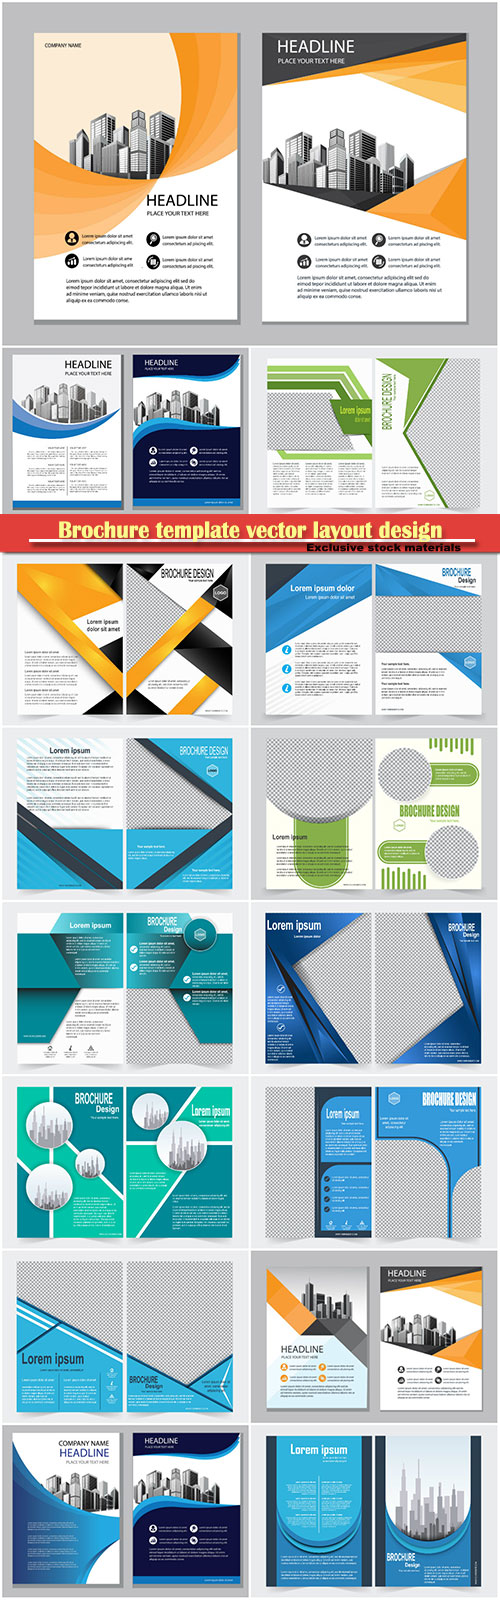 Brochure template vector layout design, corporate business annual report, magazine, flyer mockup # 142